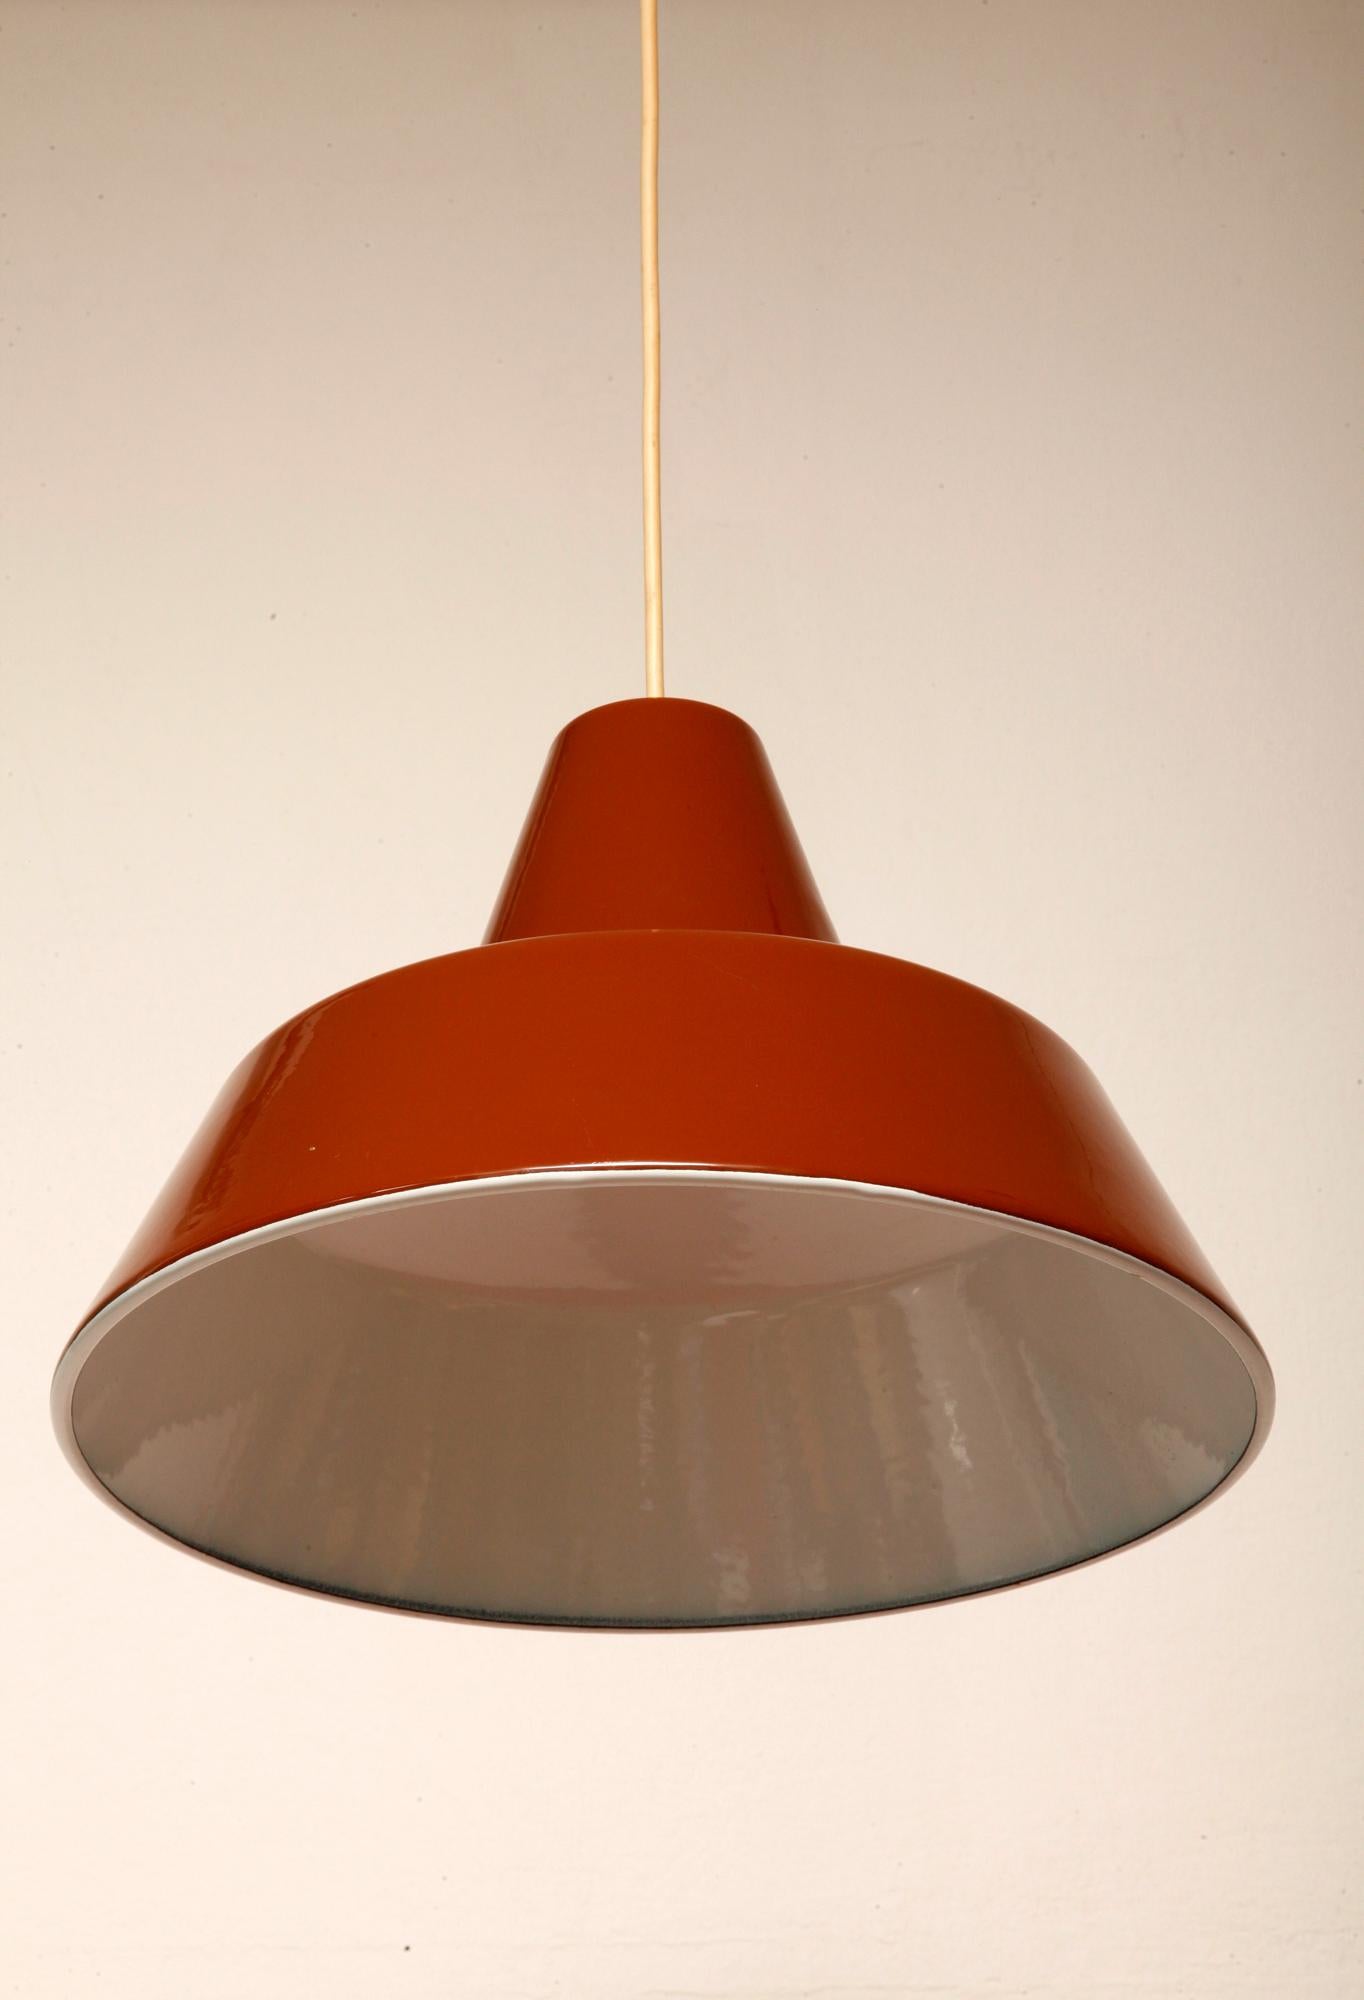 Danish pendant lamp manufactured by Louis Poulsen in the 1960s. It is made from lacquered metal that is brown on the outside and white on the inside.
Icon of Danish and world design. The pattern is more duplicated in different versions, but the